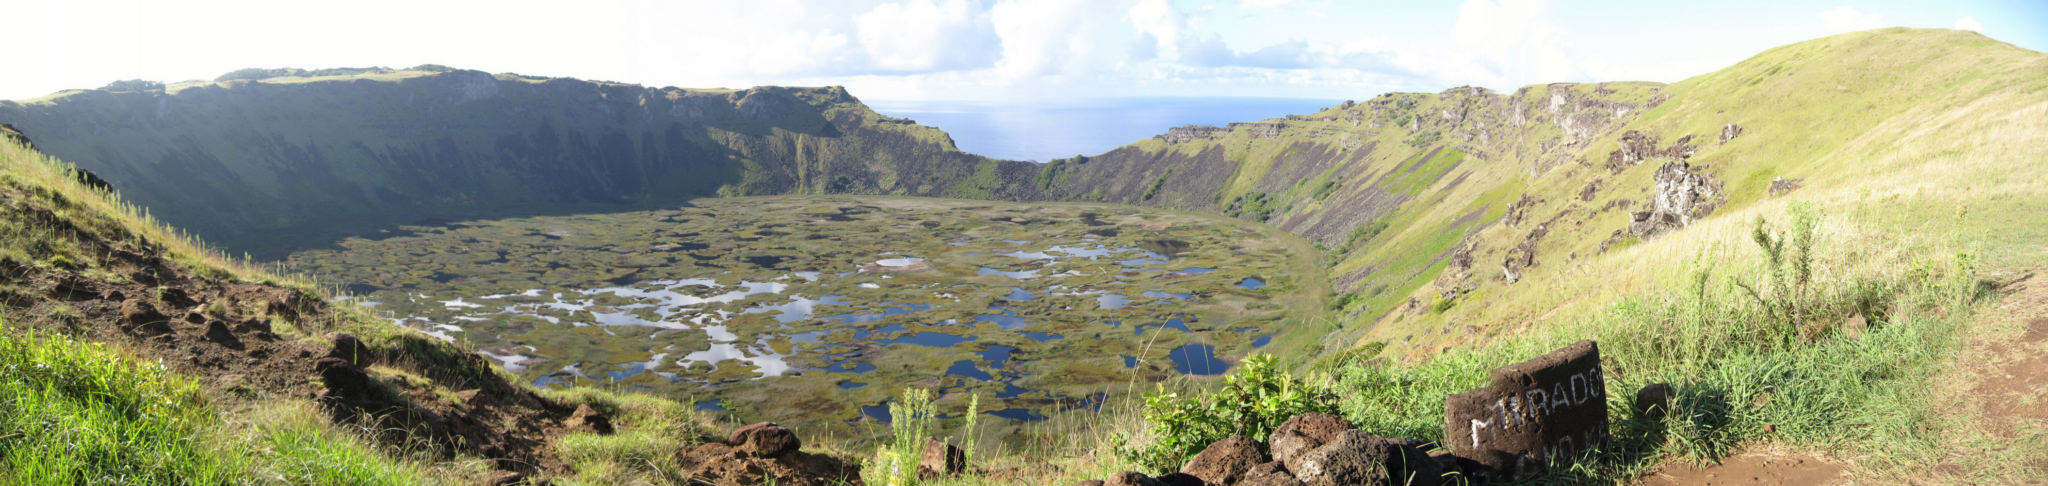 The Rano Kau crater in Rapa Nui